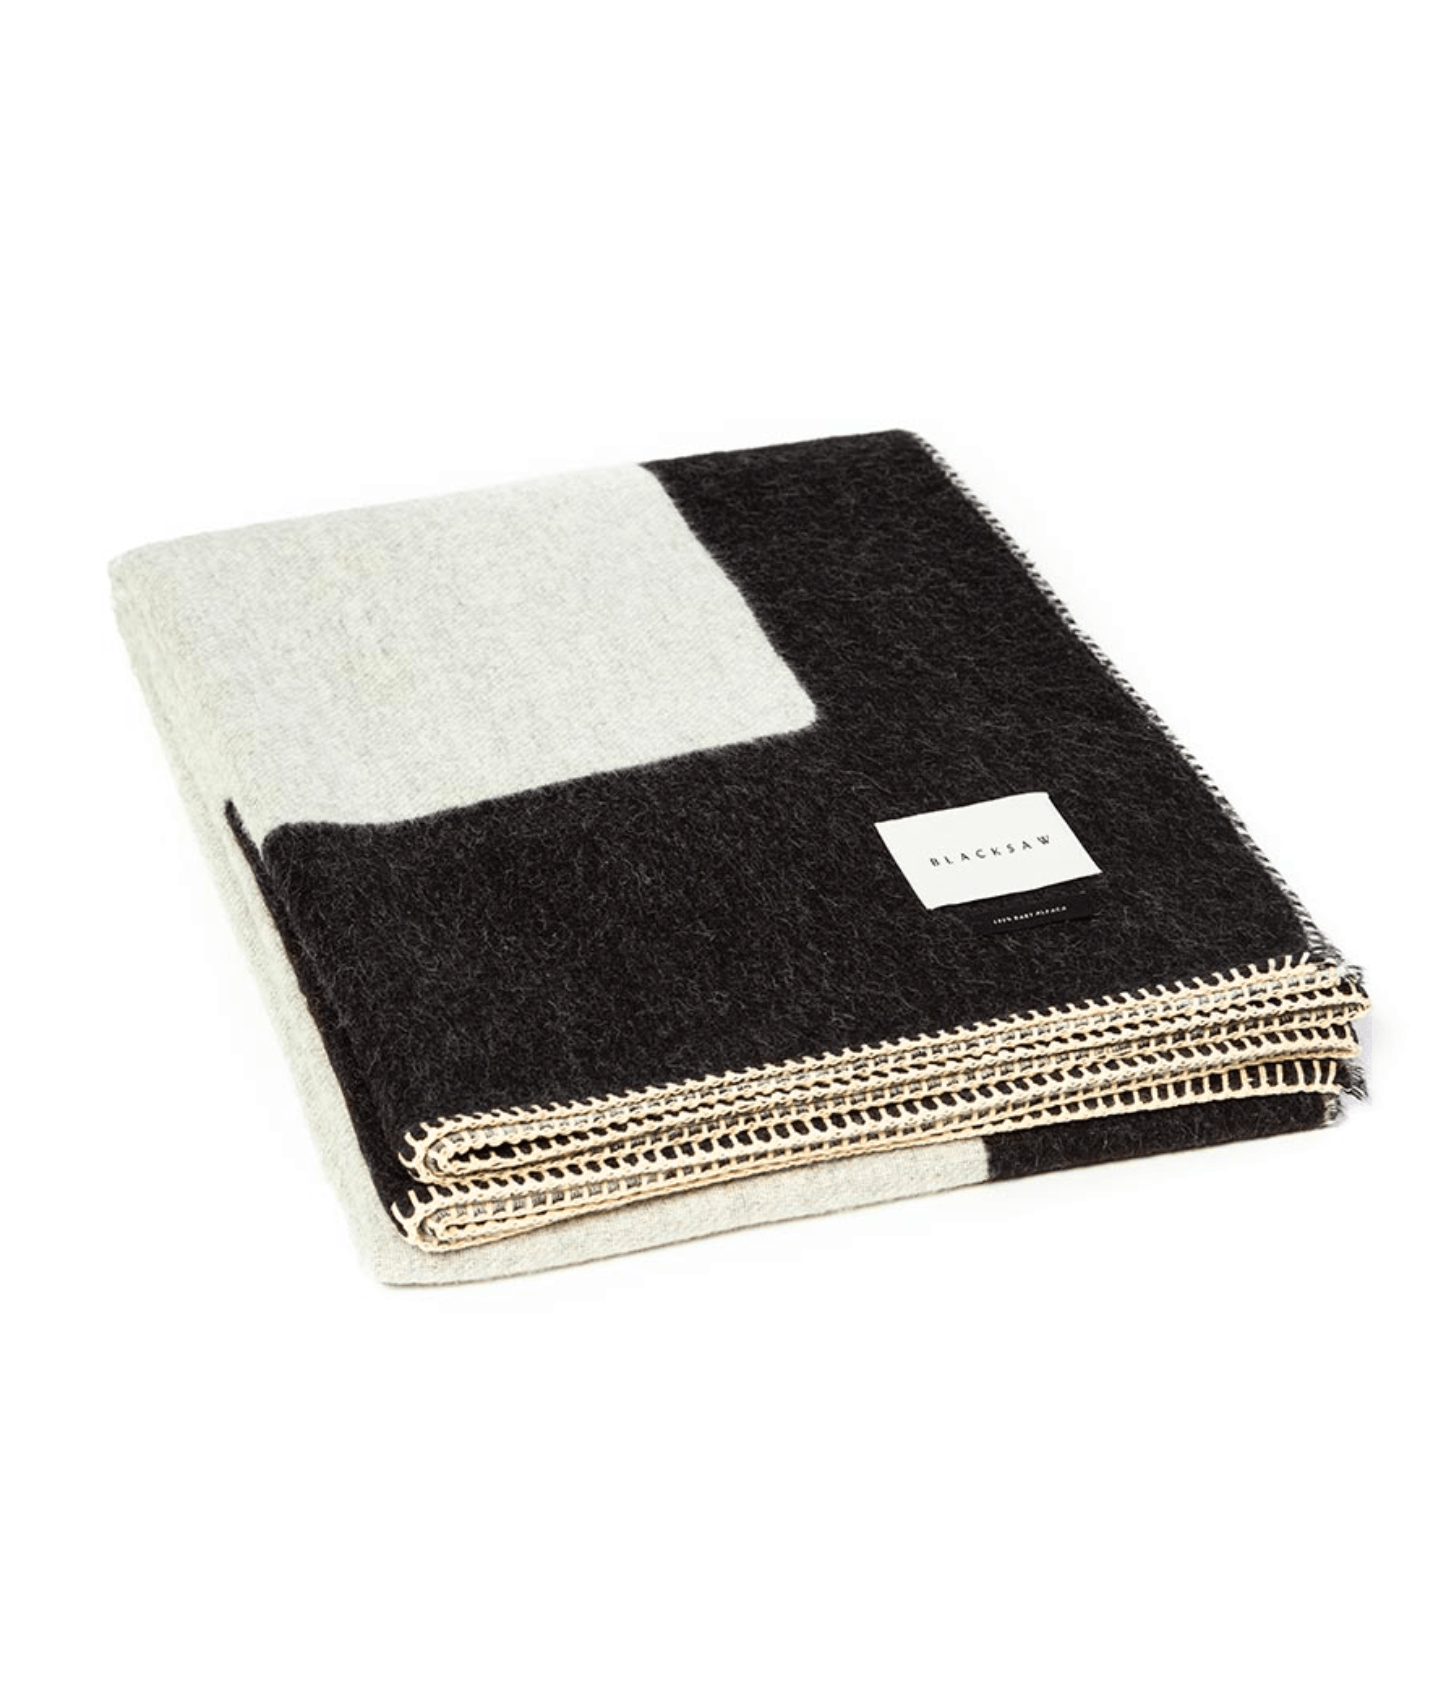 Generation Reversible Throw in Black/Ivory by Blacksaw - Haven